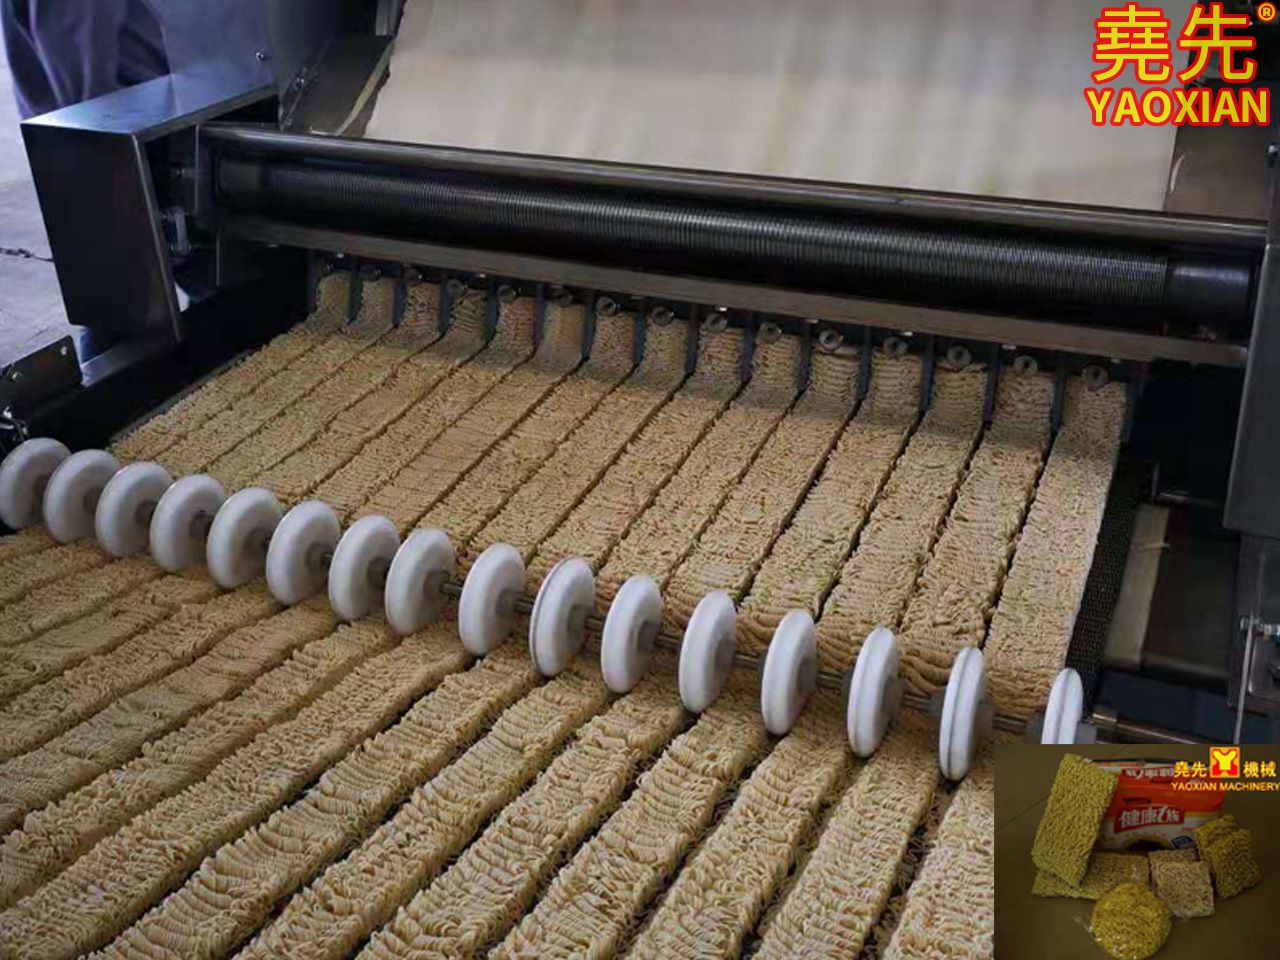 The production of river flour should pay attention to the production process and model equipment